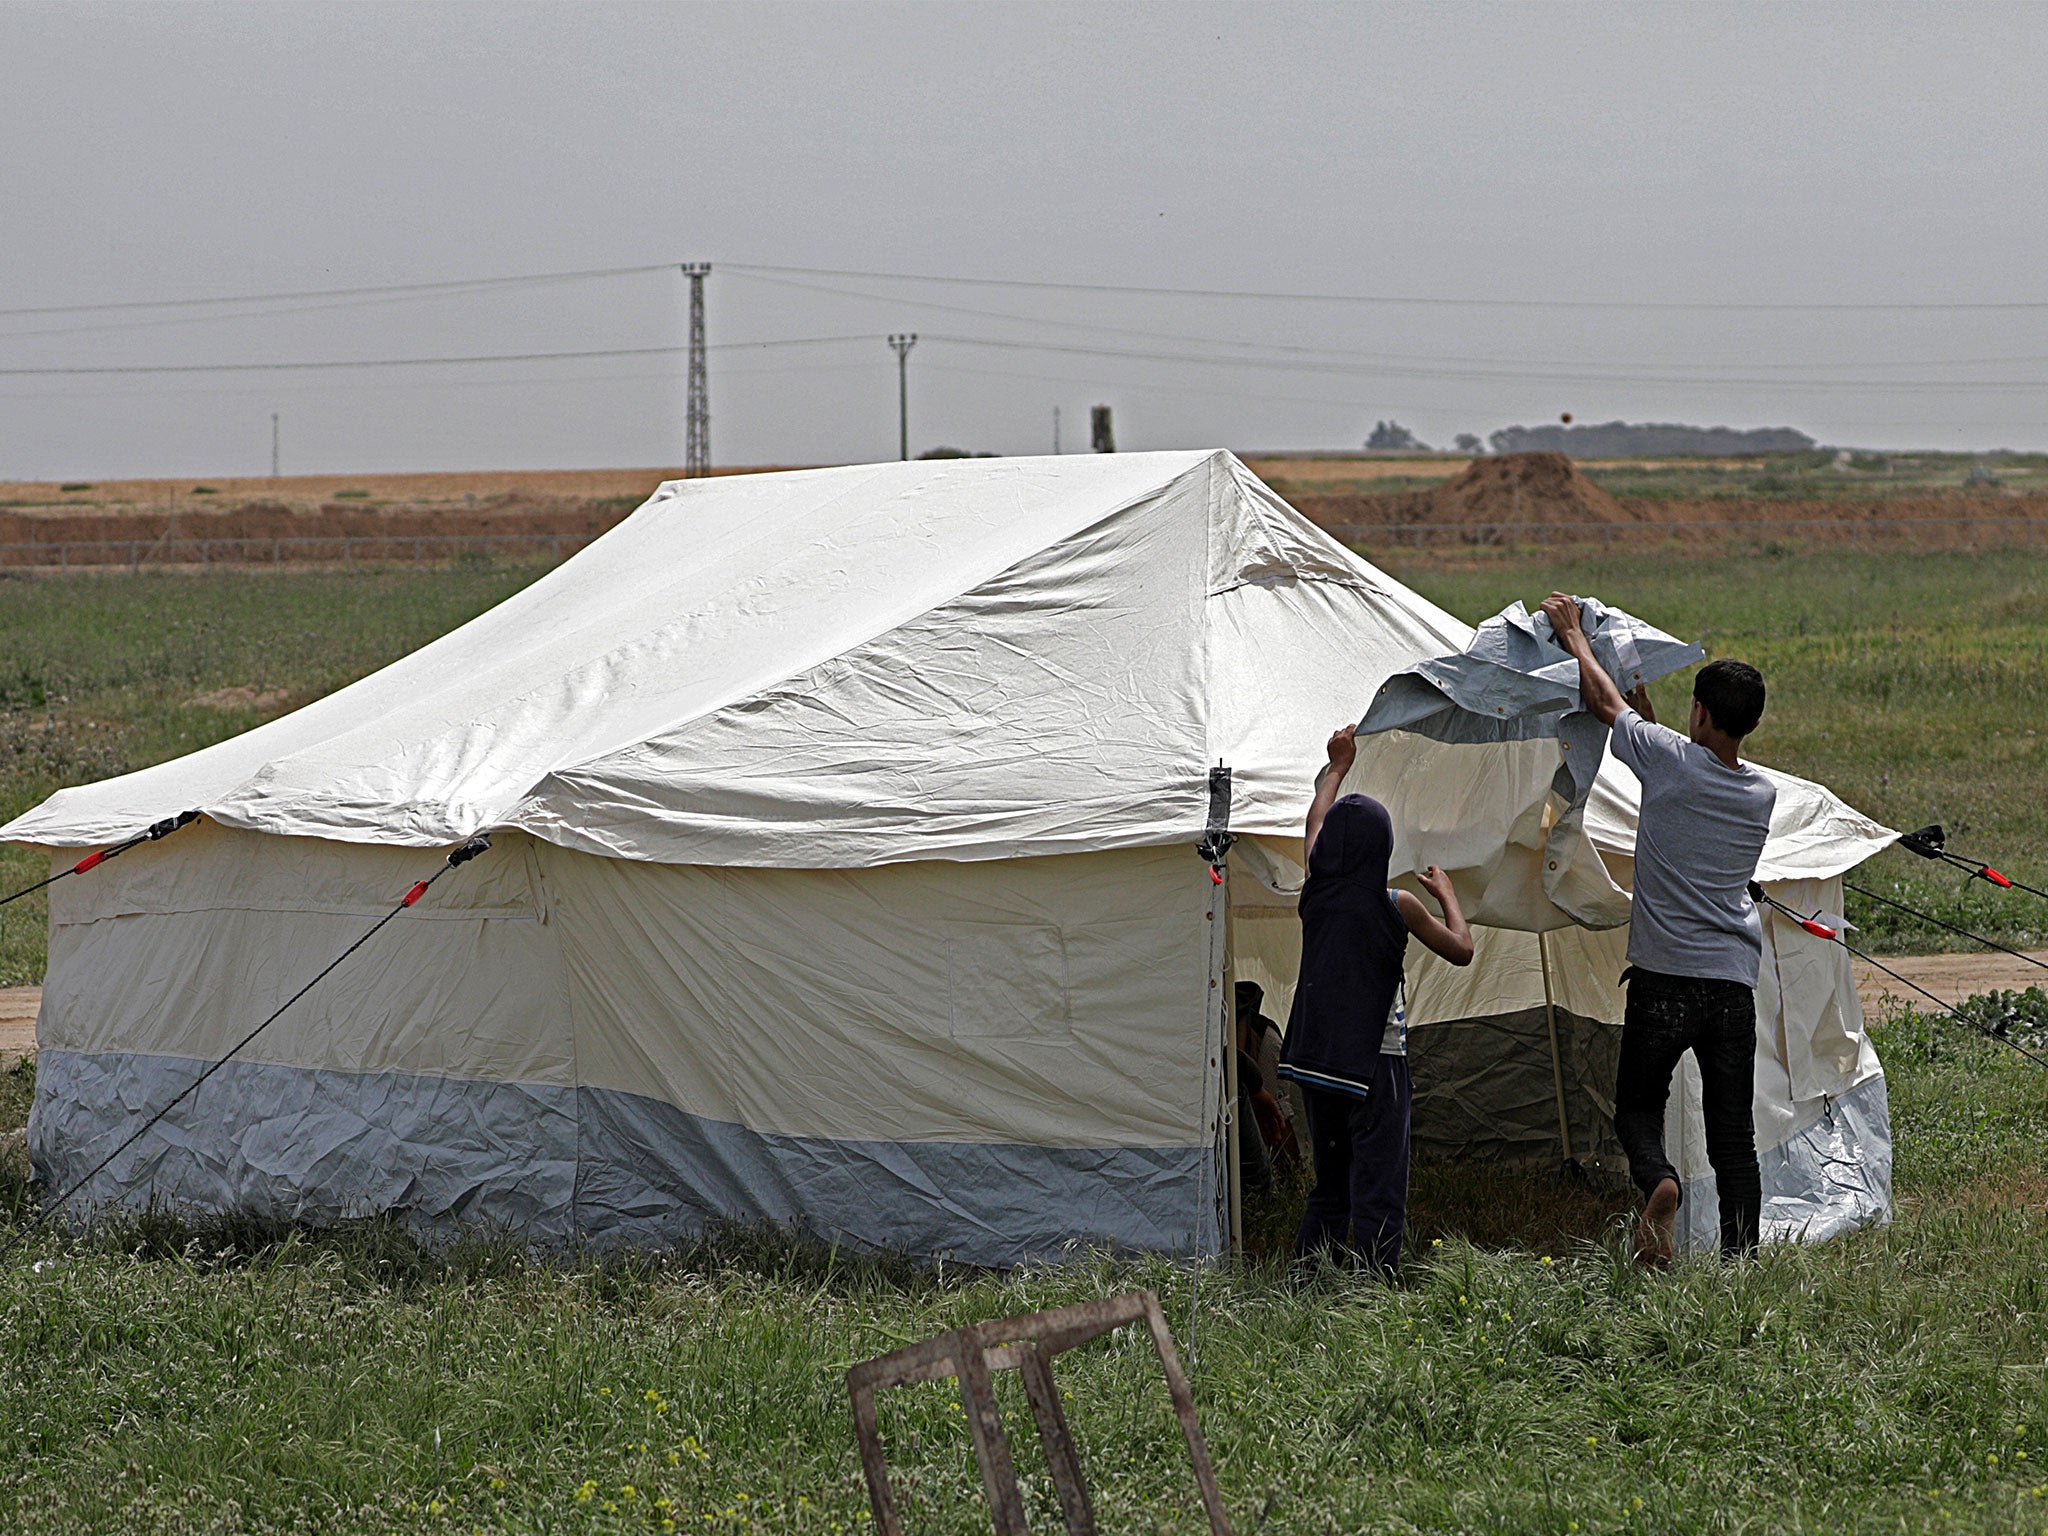 Palestinian youth prepare a tent during preparations for mass protests along the border between Israel and the Gaza Strip